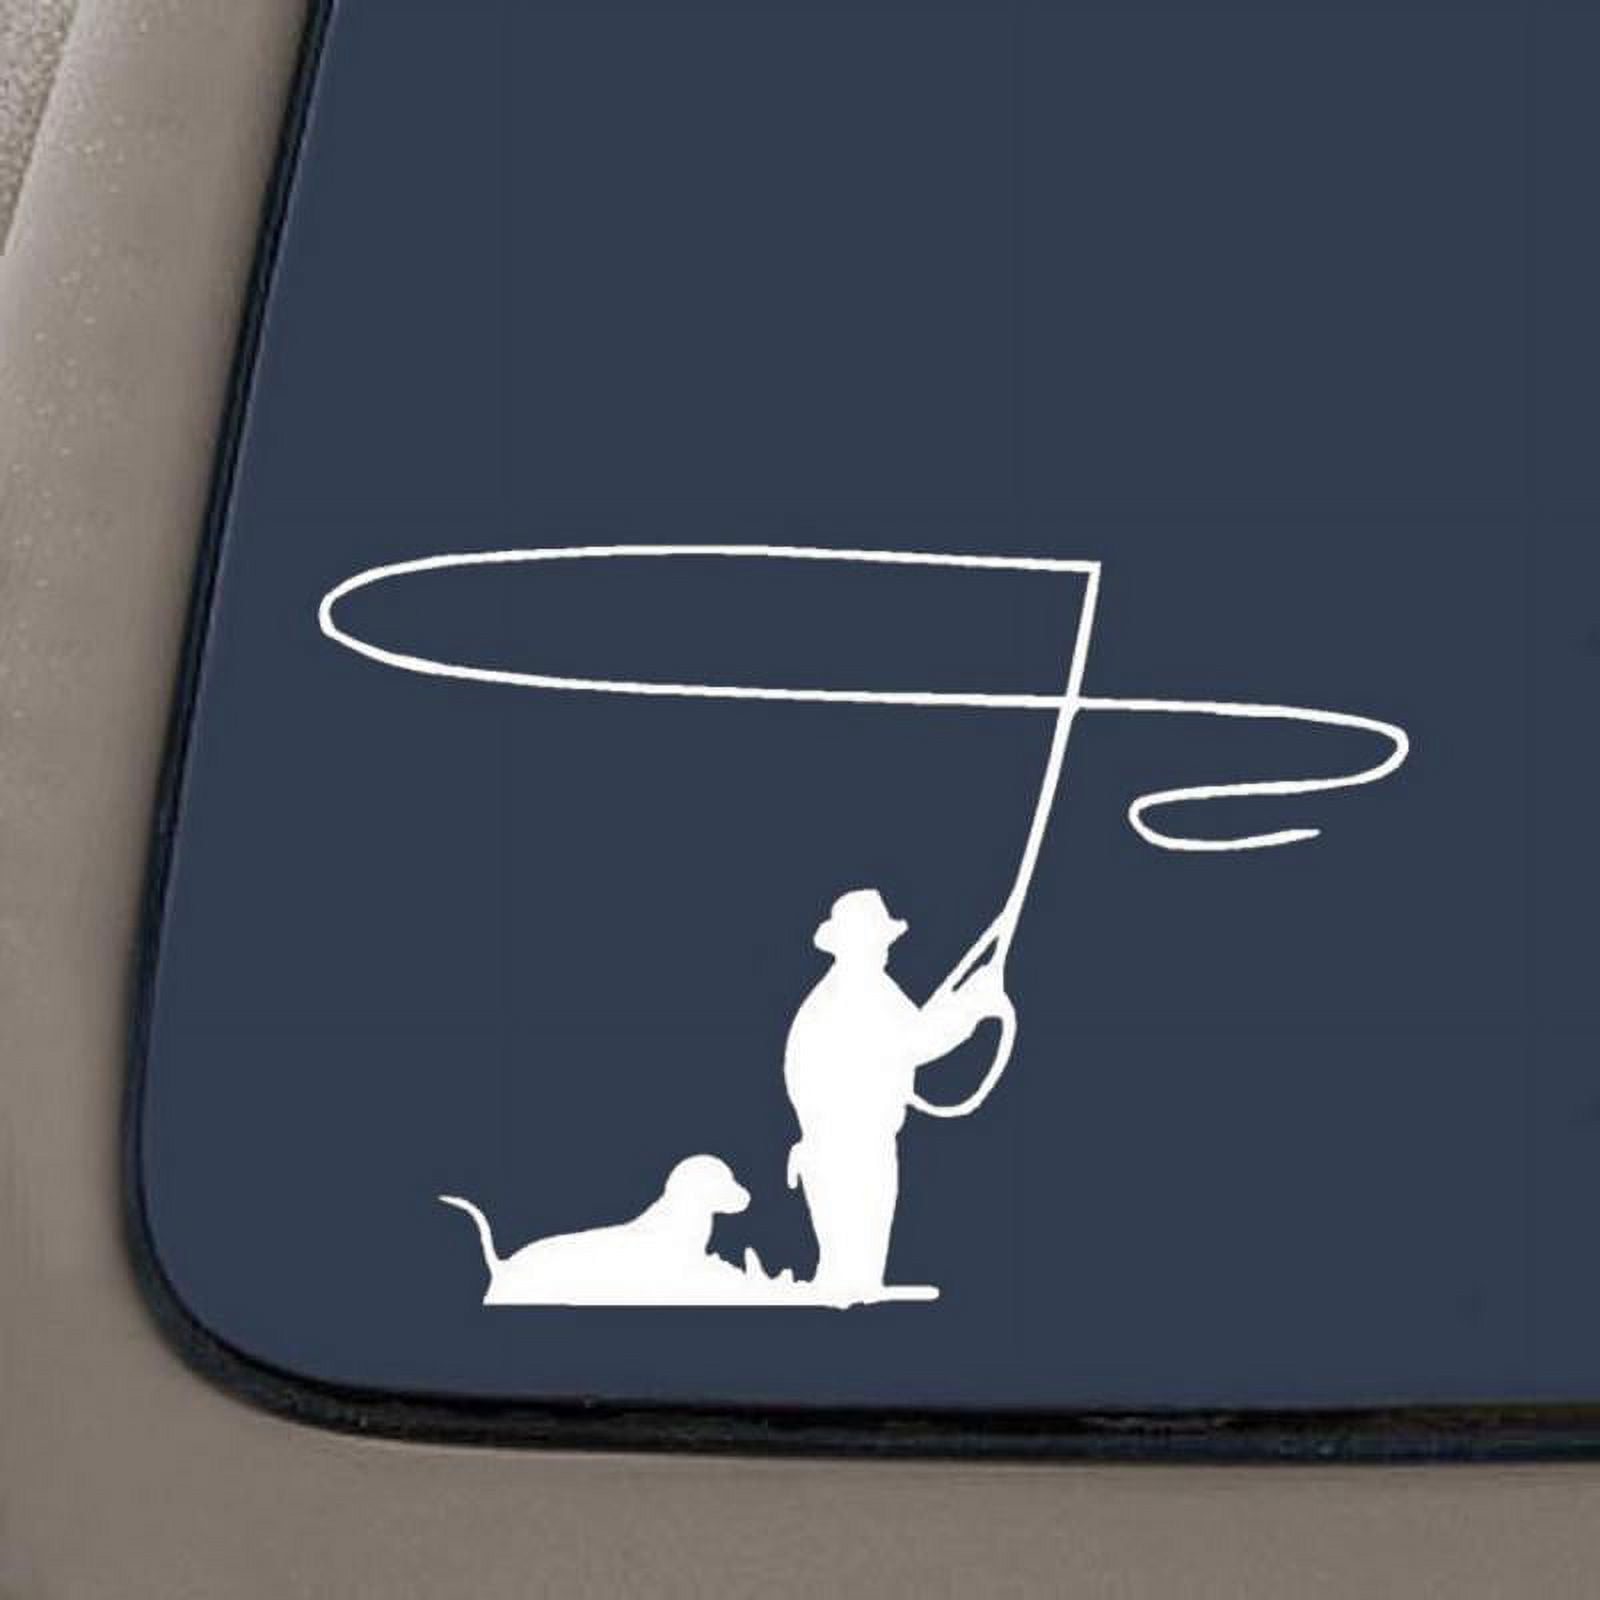 Fly Fishing Decal | 8.5-Inches By 6-Inches | White Vinyl Decal | Car Truck  Van SUV Laptop Macbook Wall Decals